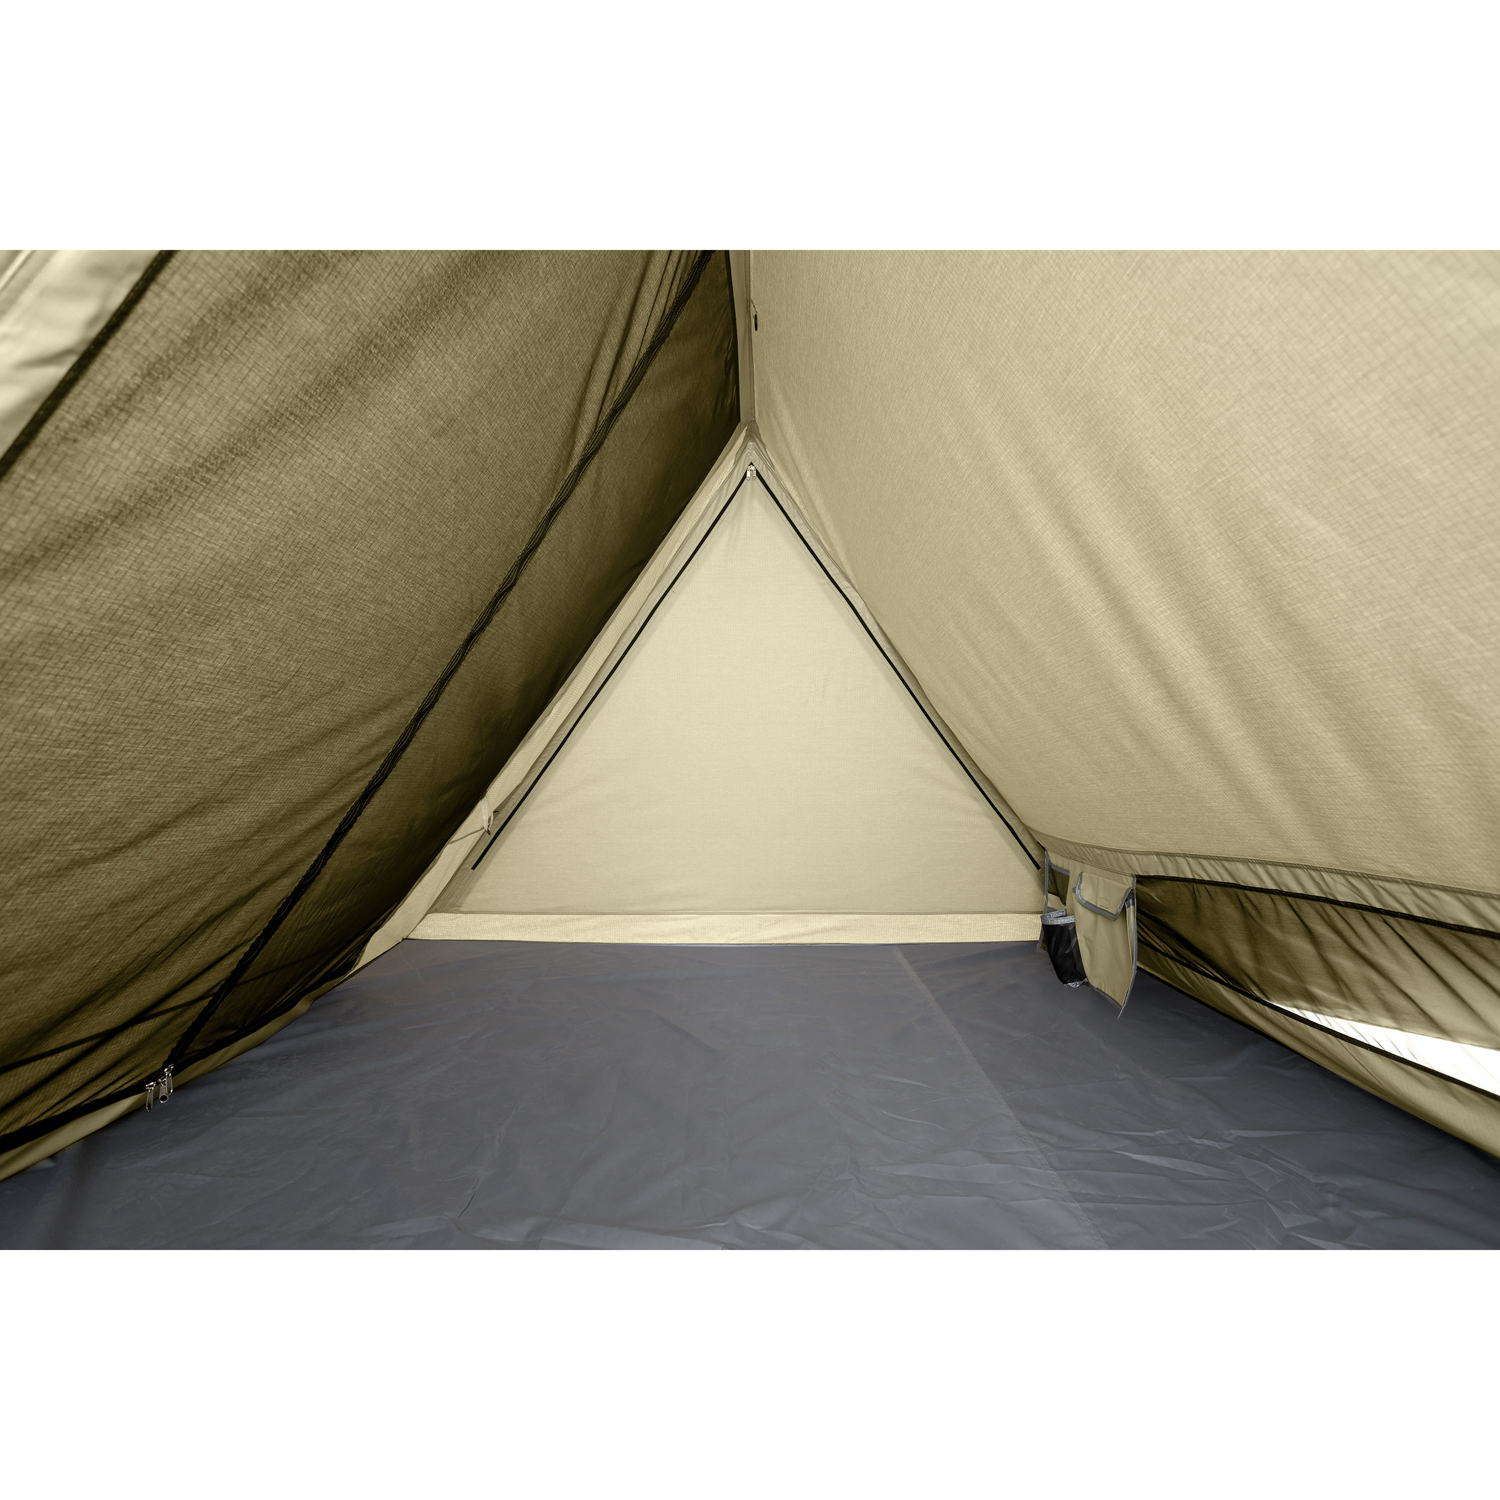 Ozark Trail 8’ x 7’ 4-Person A-Frame Tent with Awning - image 4 of 6